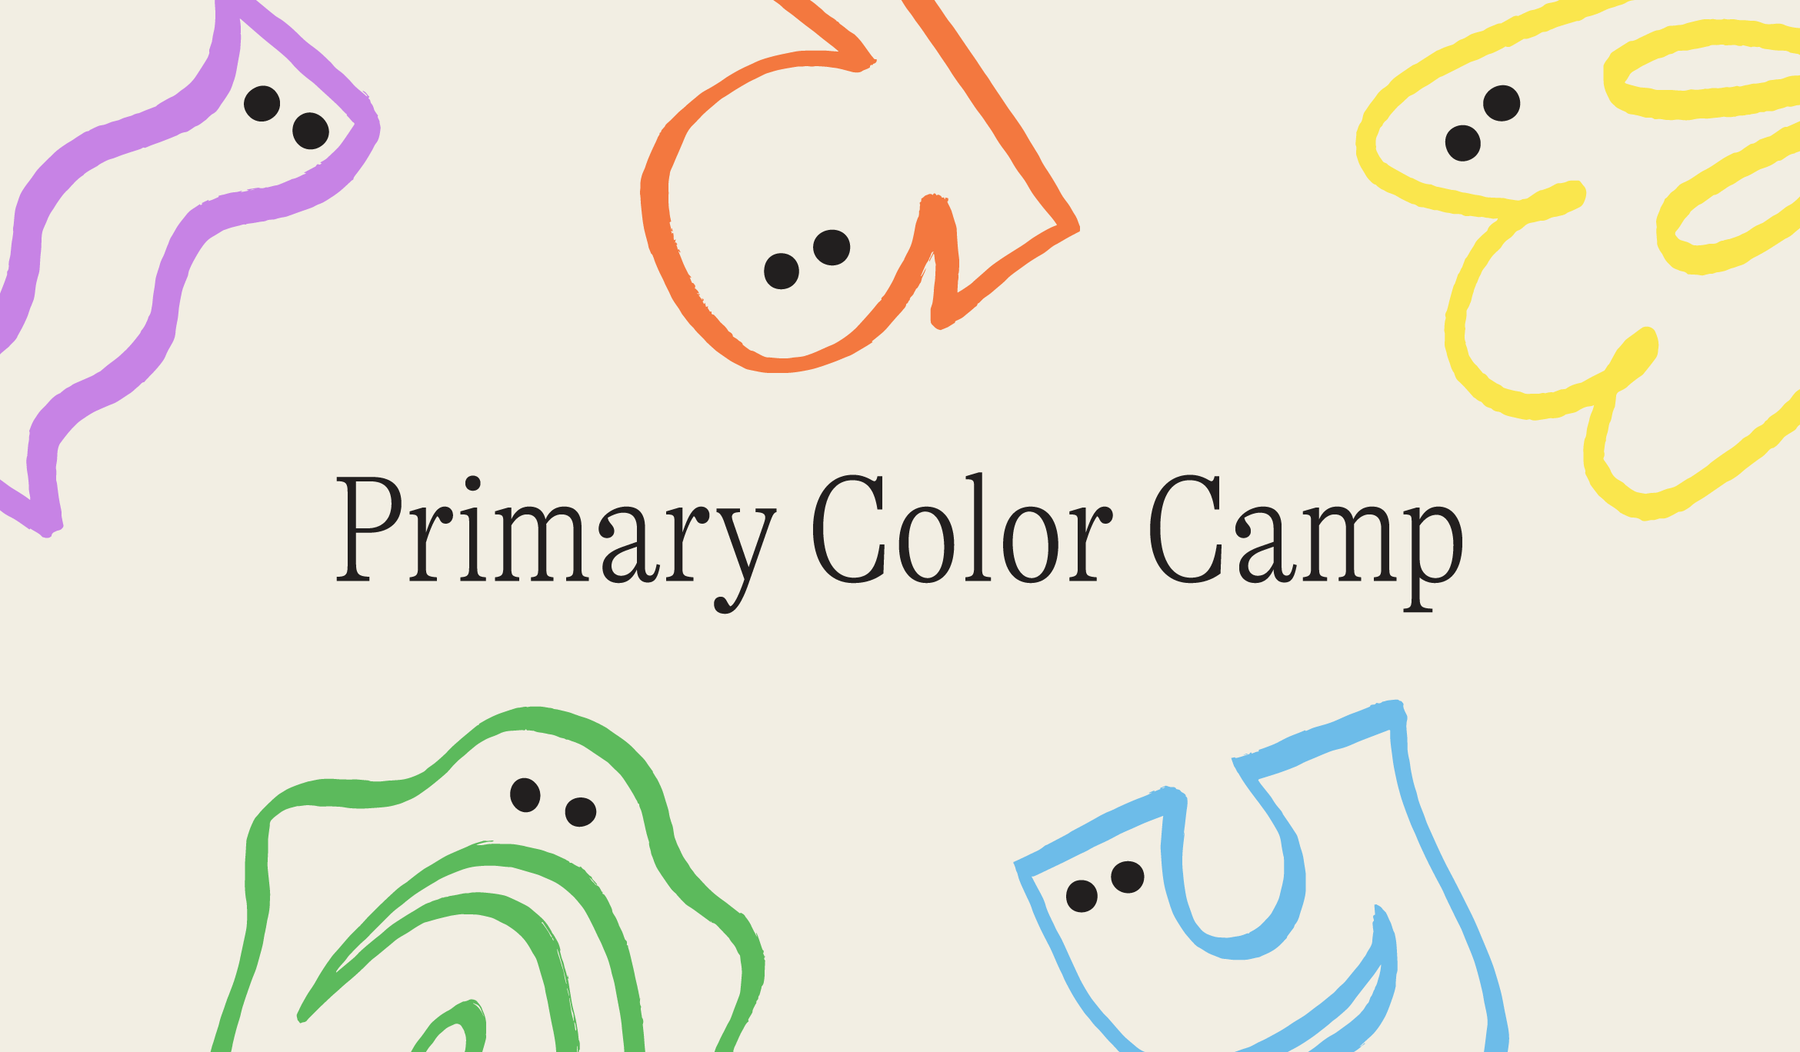 Welcome to Primary Color Camp!